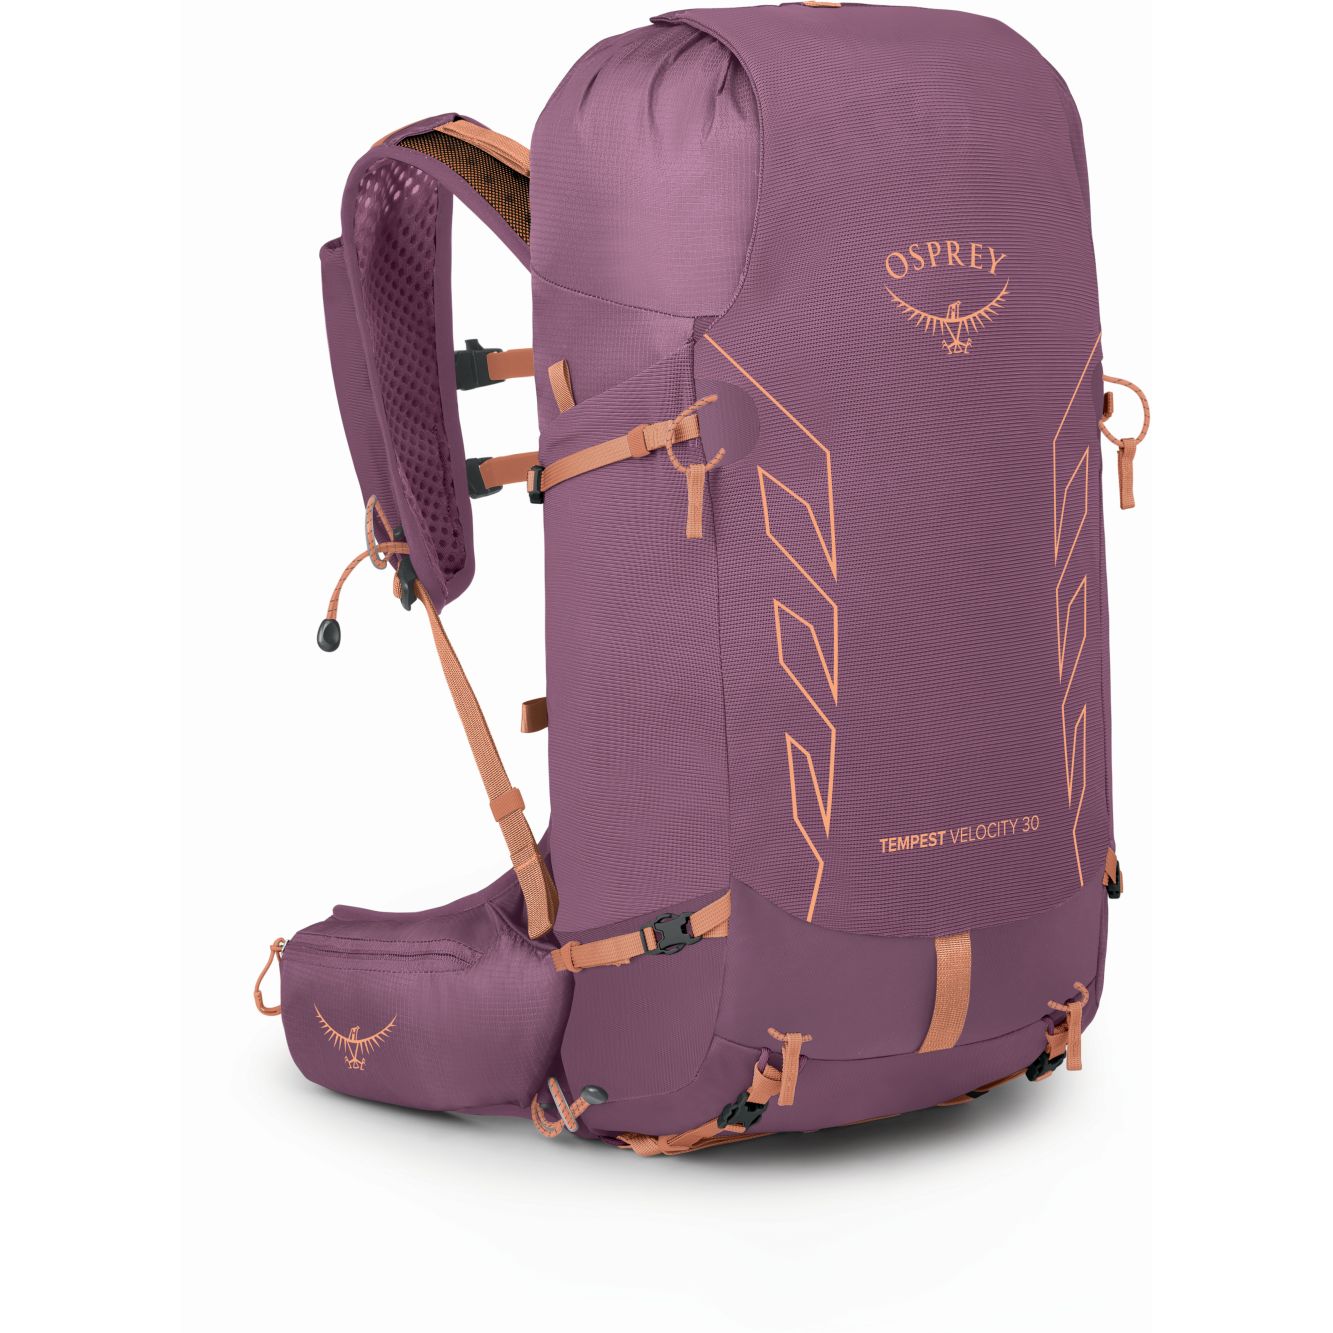 Picture of Osprey Tempest Velocity 30 Women&#039;s Backpack - Pashmina/Melon - M/L